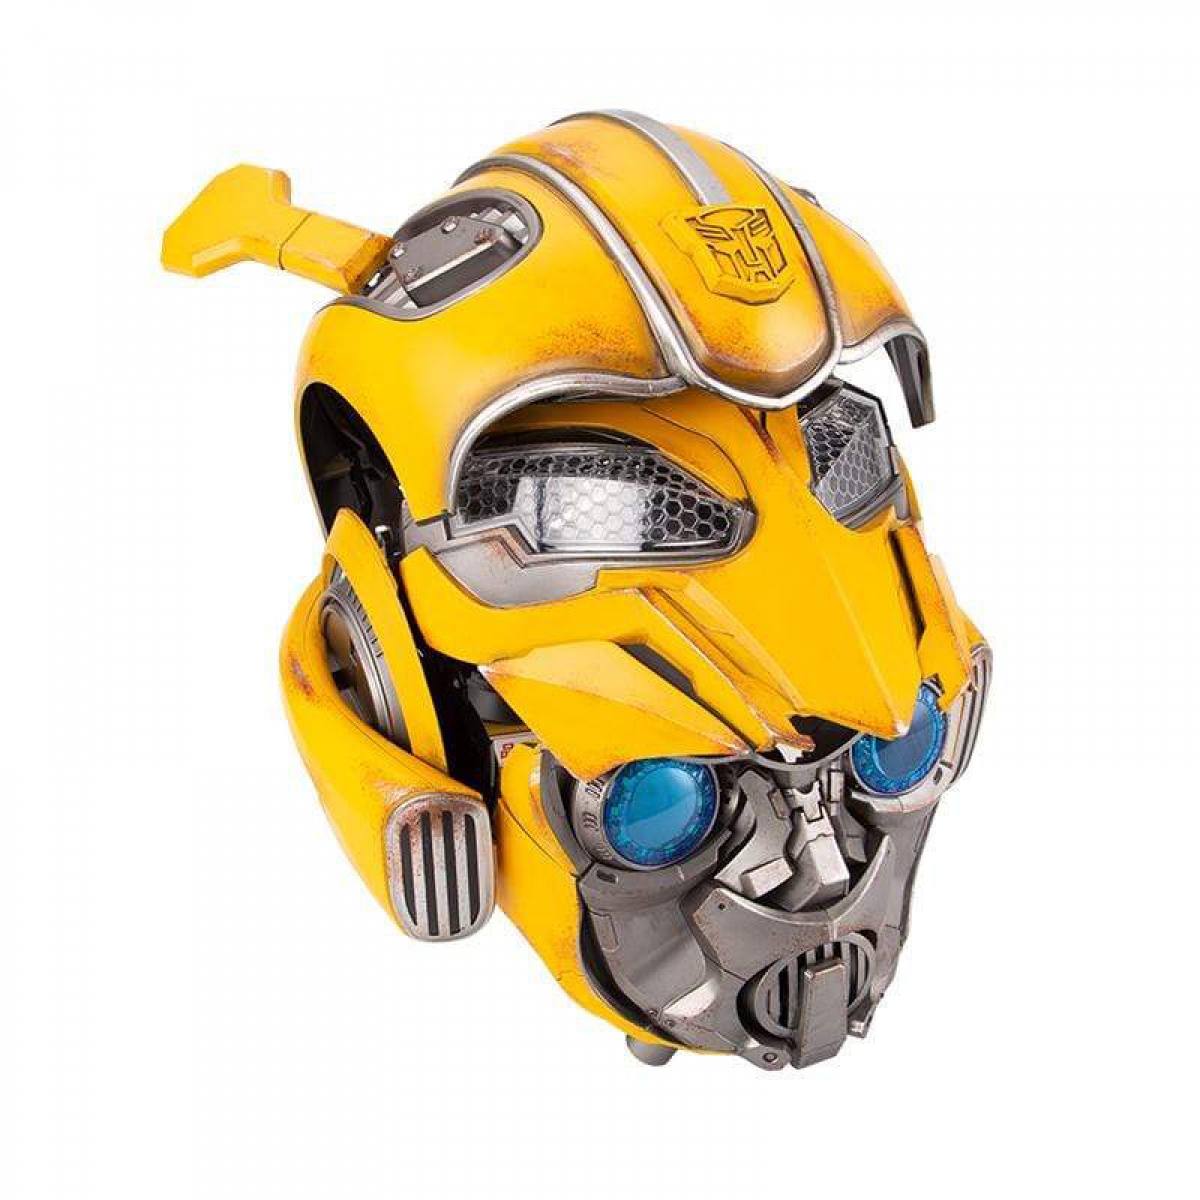 Transformers X Pucloce Helmet 1:1 With Base Bluetooth speaker D0841